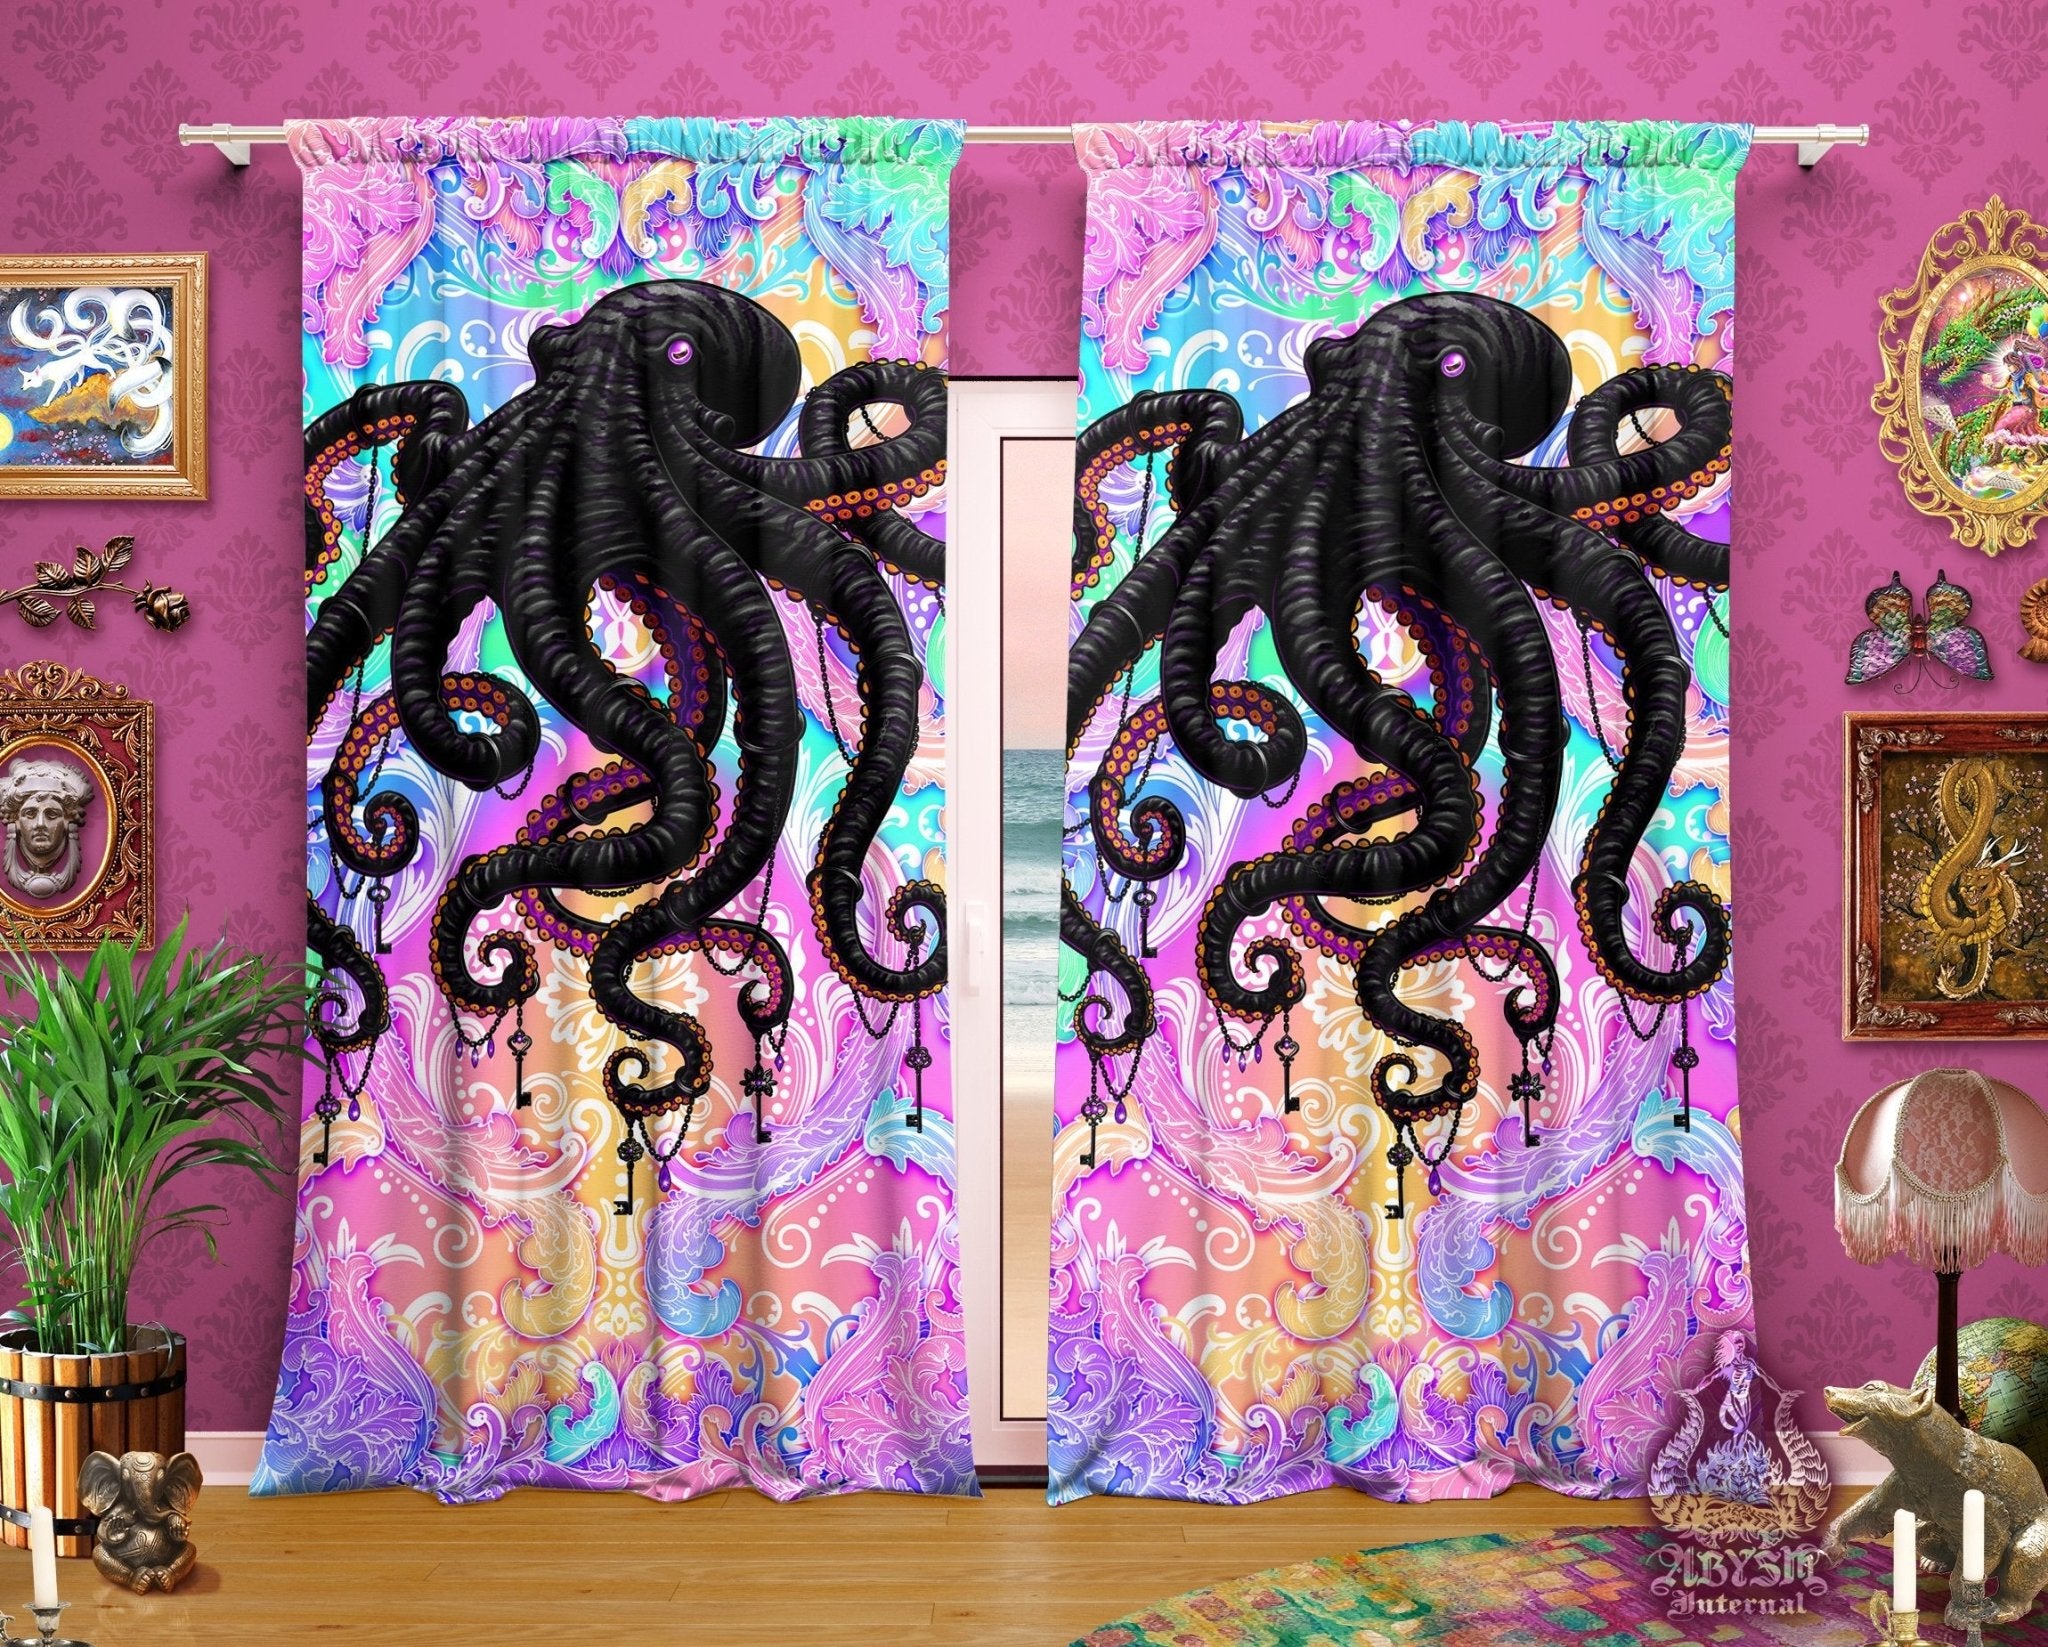 Octopus Blackout Curtains, Long Window Panels, Psychedelic Art Print, Yume Kawaii, Holographic and Aesthetic Room Decor, Funky and Eclectic Home Decor - Pastel Punk Black - Abysm Internal